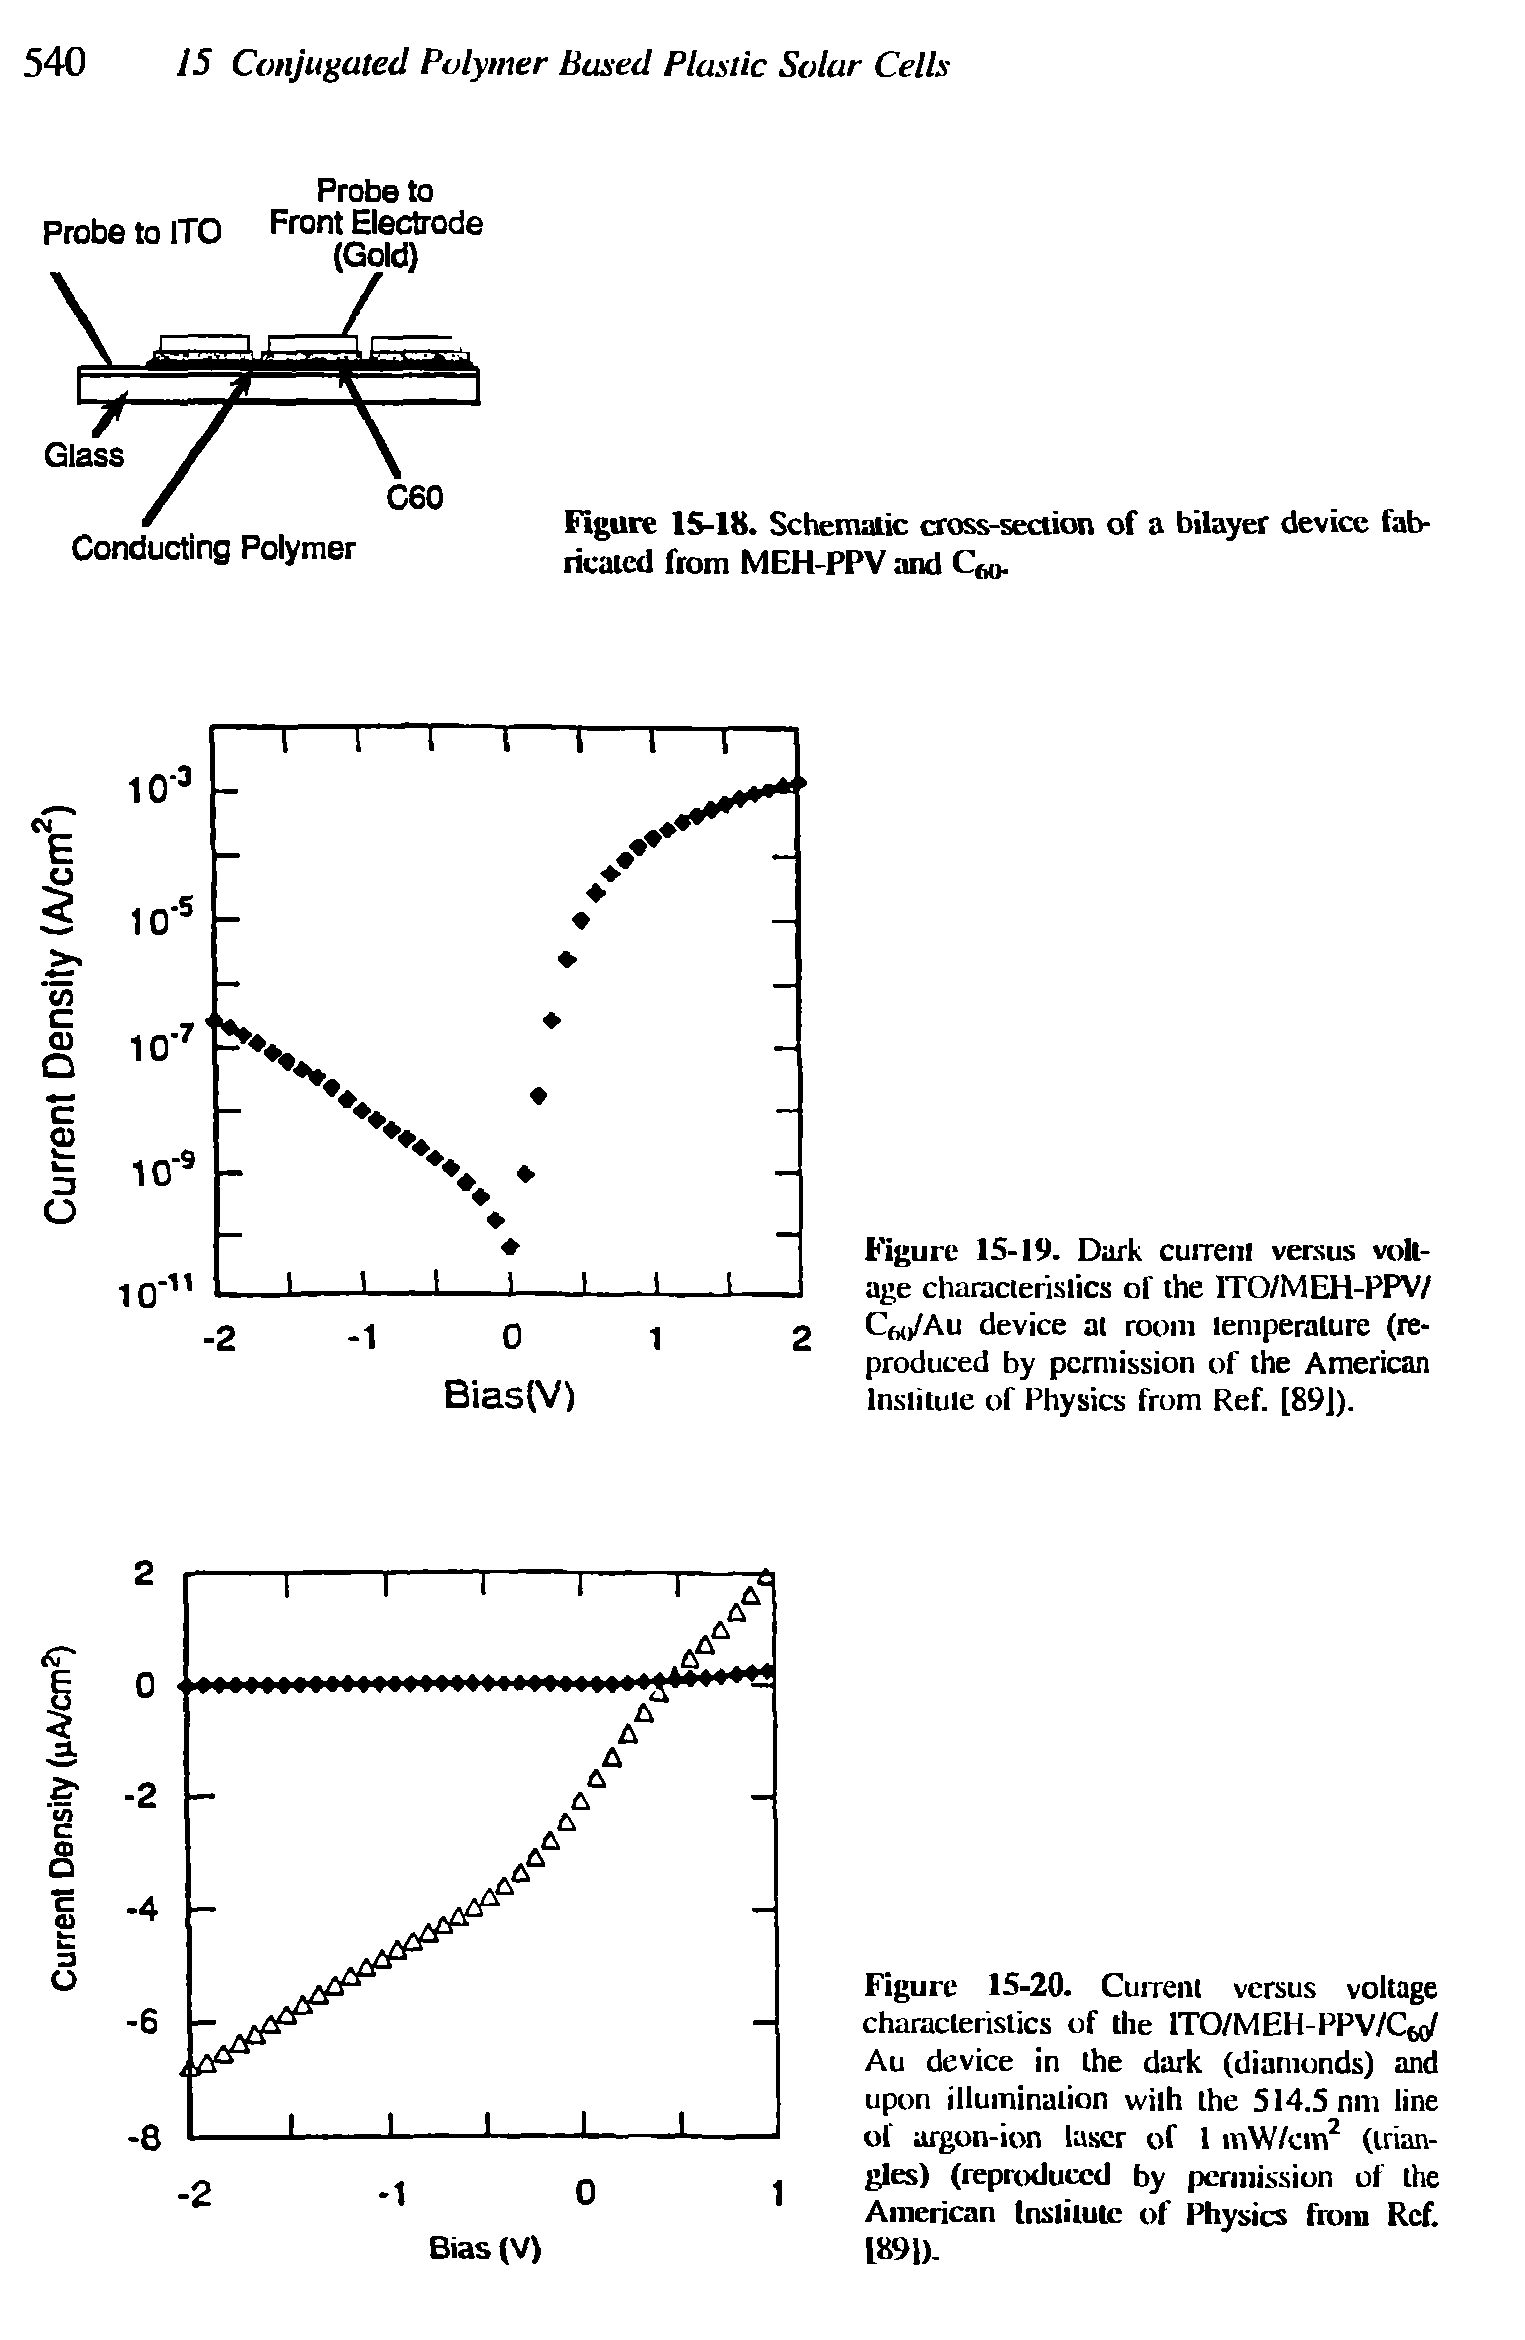 Figure 15-20. Currenl versus voltage characteristics of the lTO/MEH-PPV/C Au device in the dark (diamonds) and upon illumination wilh the 514.5 nm line of argon-ion laser of 1 mW/cm2 (triangles) (reproduced by permission of the American Institute of Physics from Ref. 1891).